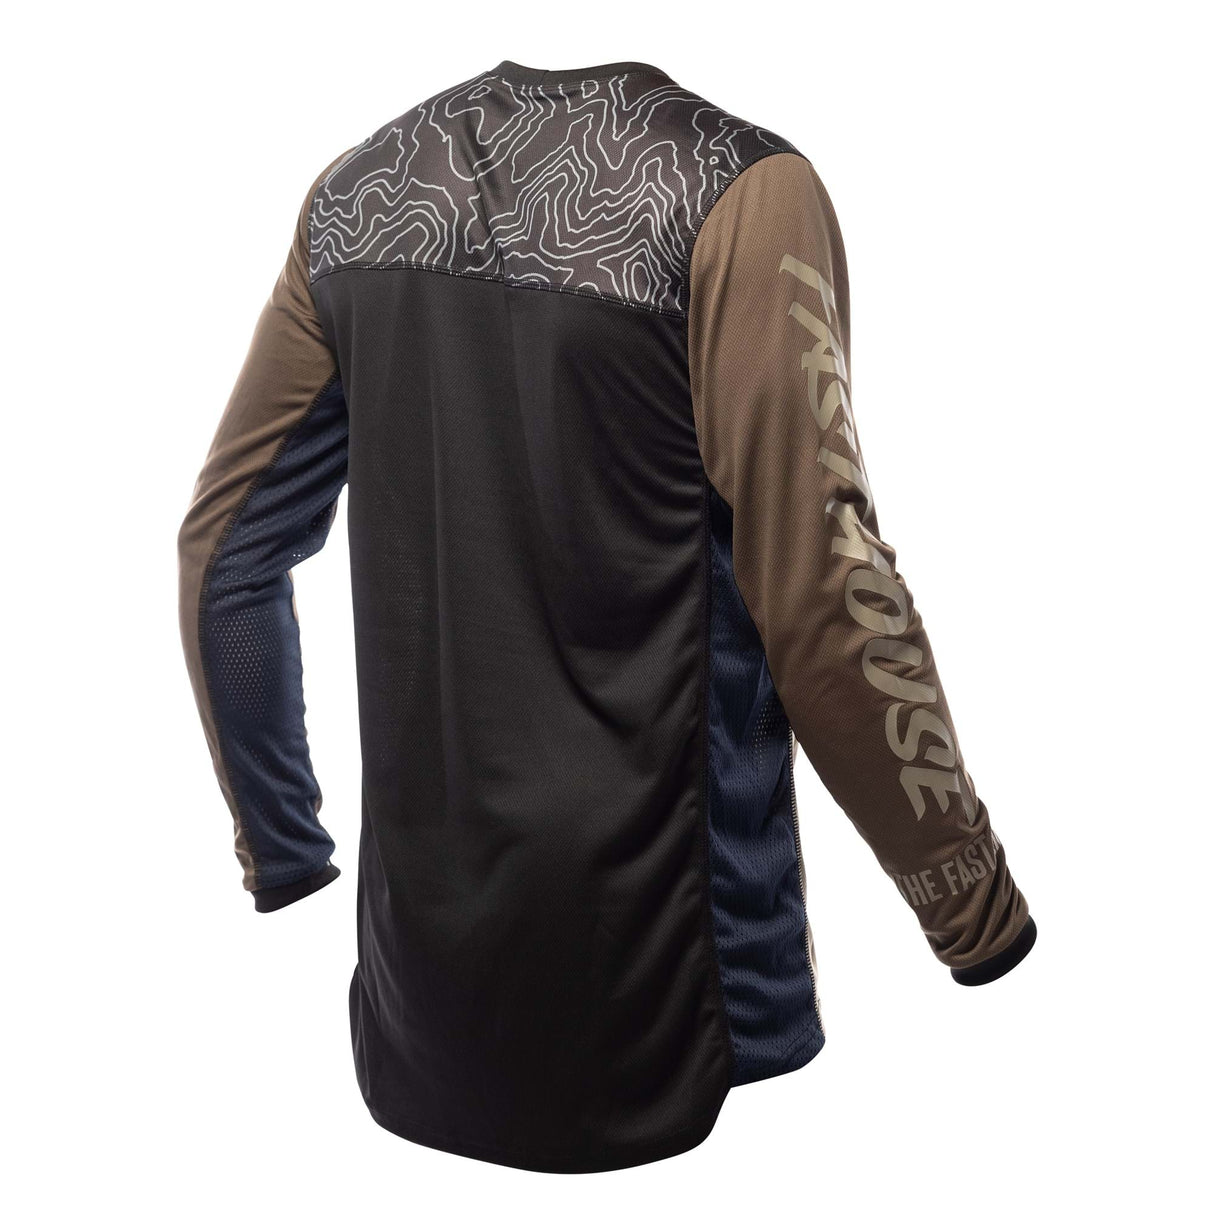 Fasthouse Off-Road Long Sleeve Jersey